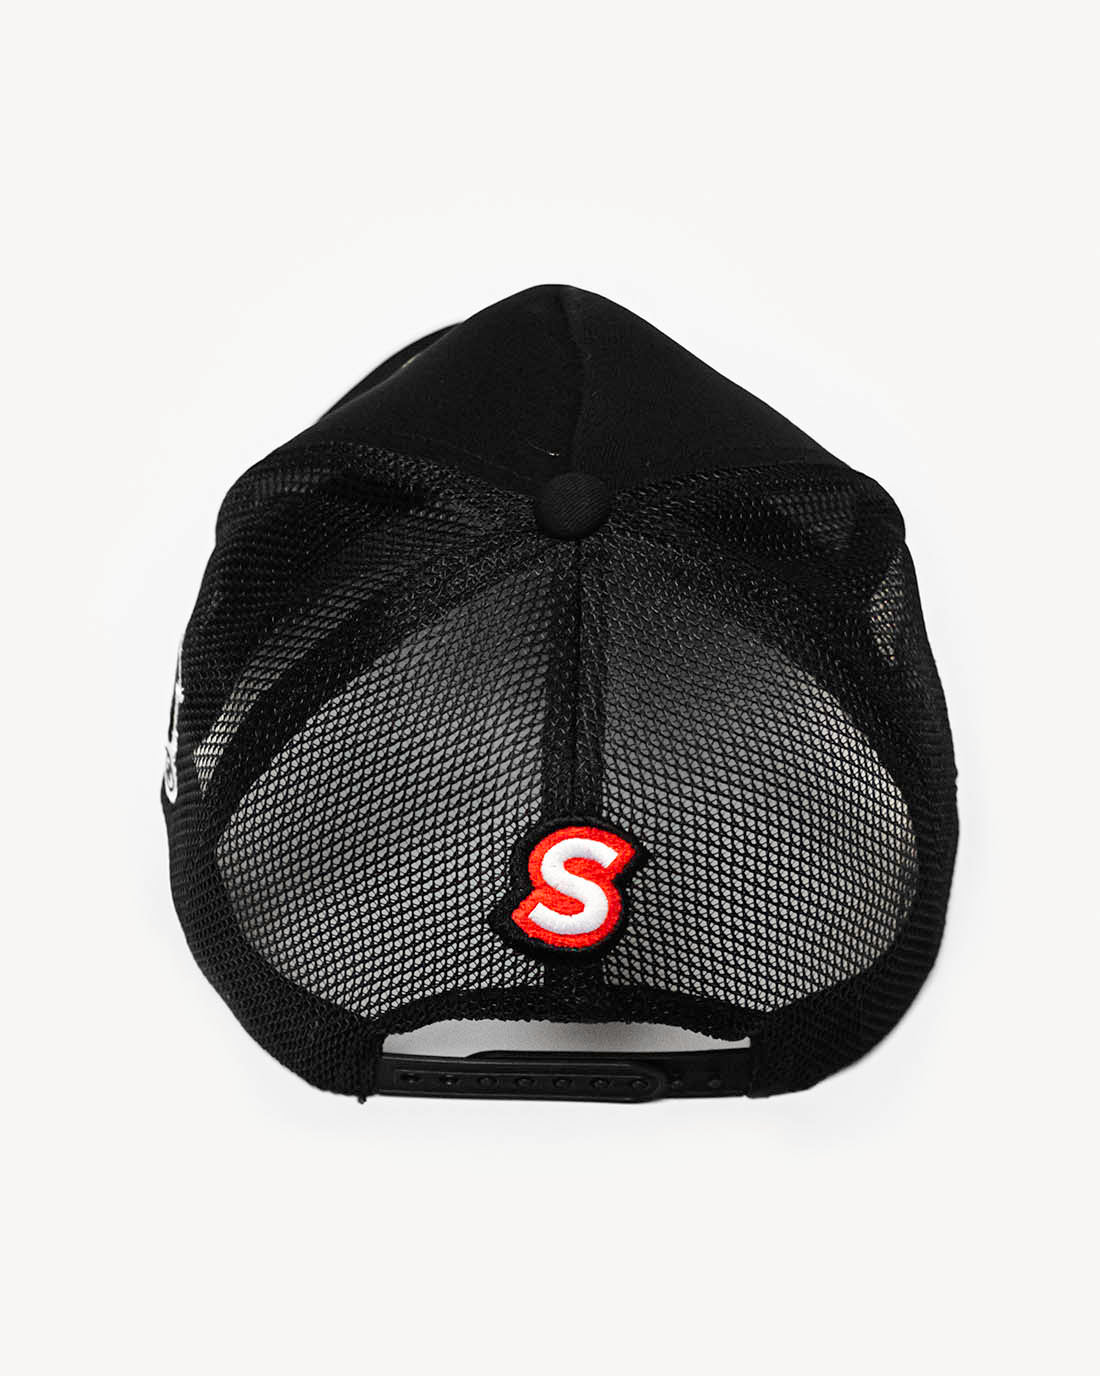 Rear side view of a black snapback hat with trendy racing-inspired embroidered design and cooling mesh back.